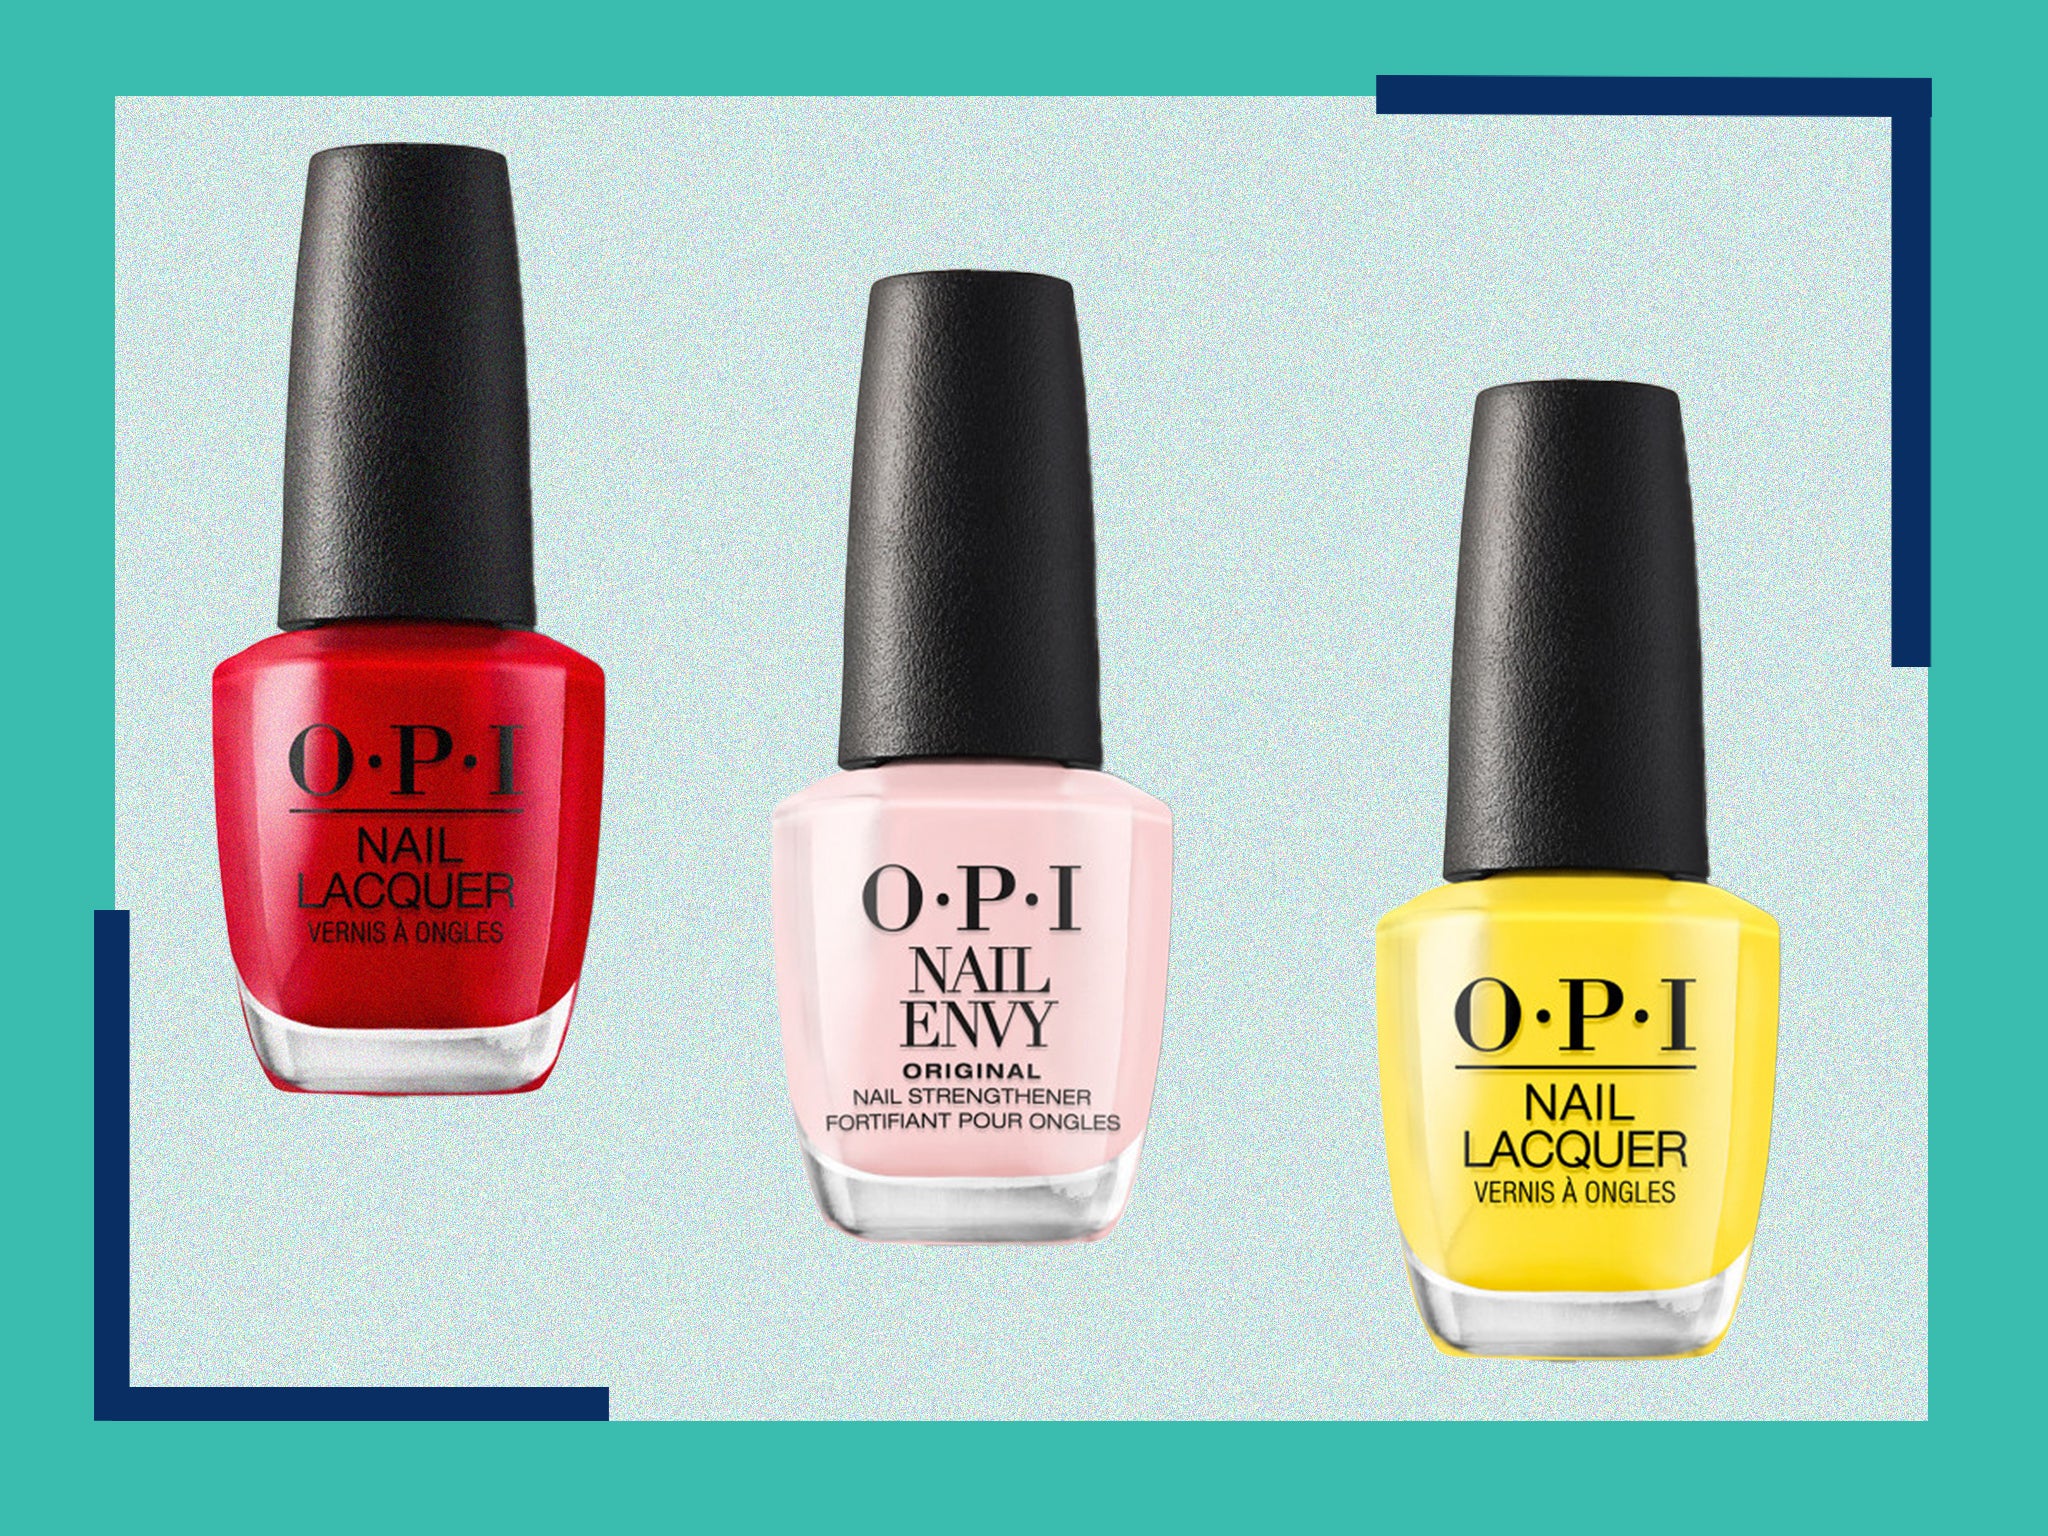 markeerstift verwijderen kalmeren OPI nail polish reveals its most popular colours from “bubble bath” to “I'm  not really a waitress” | The Independent